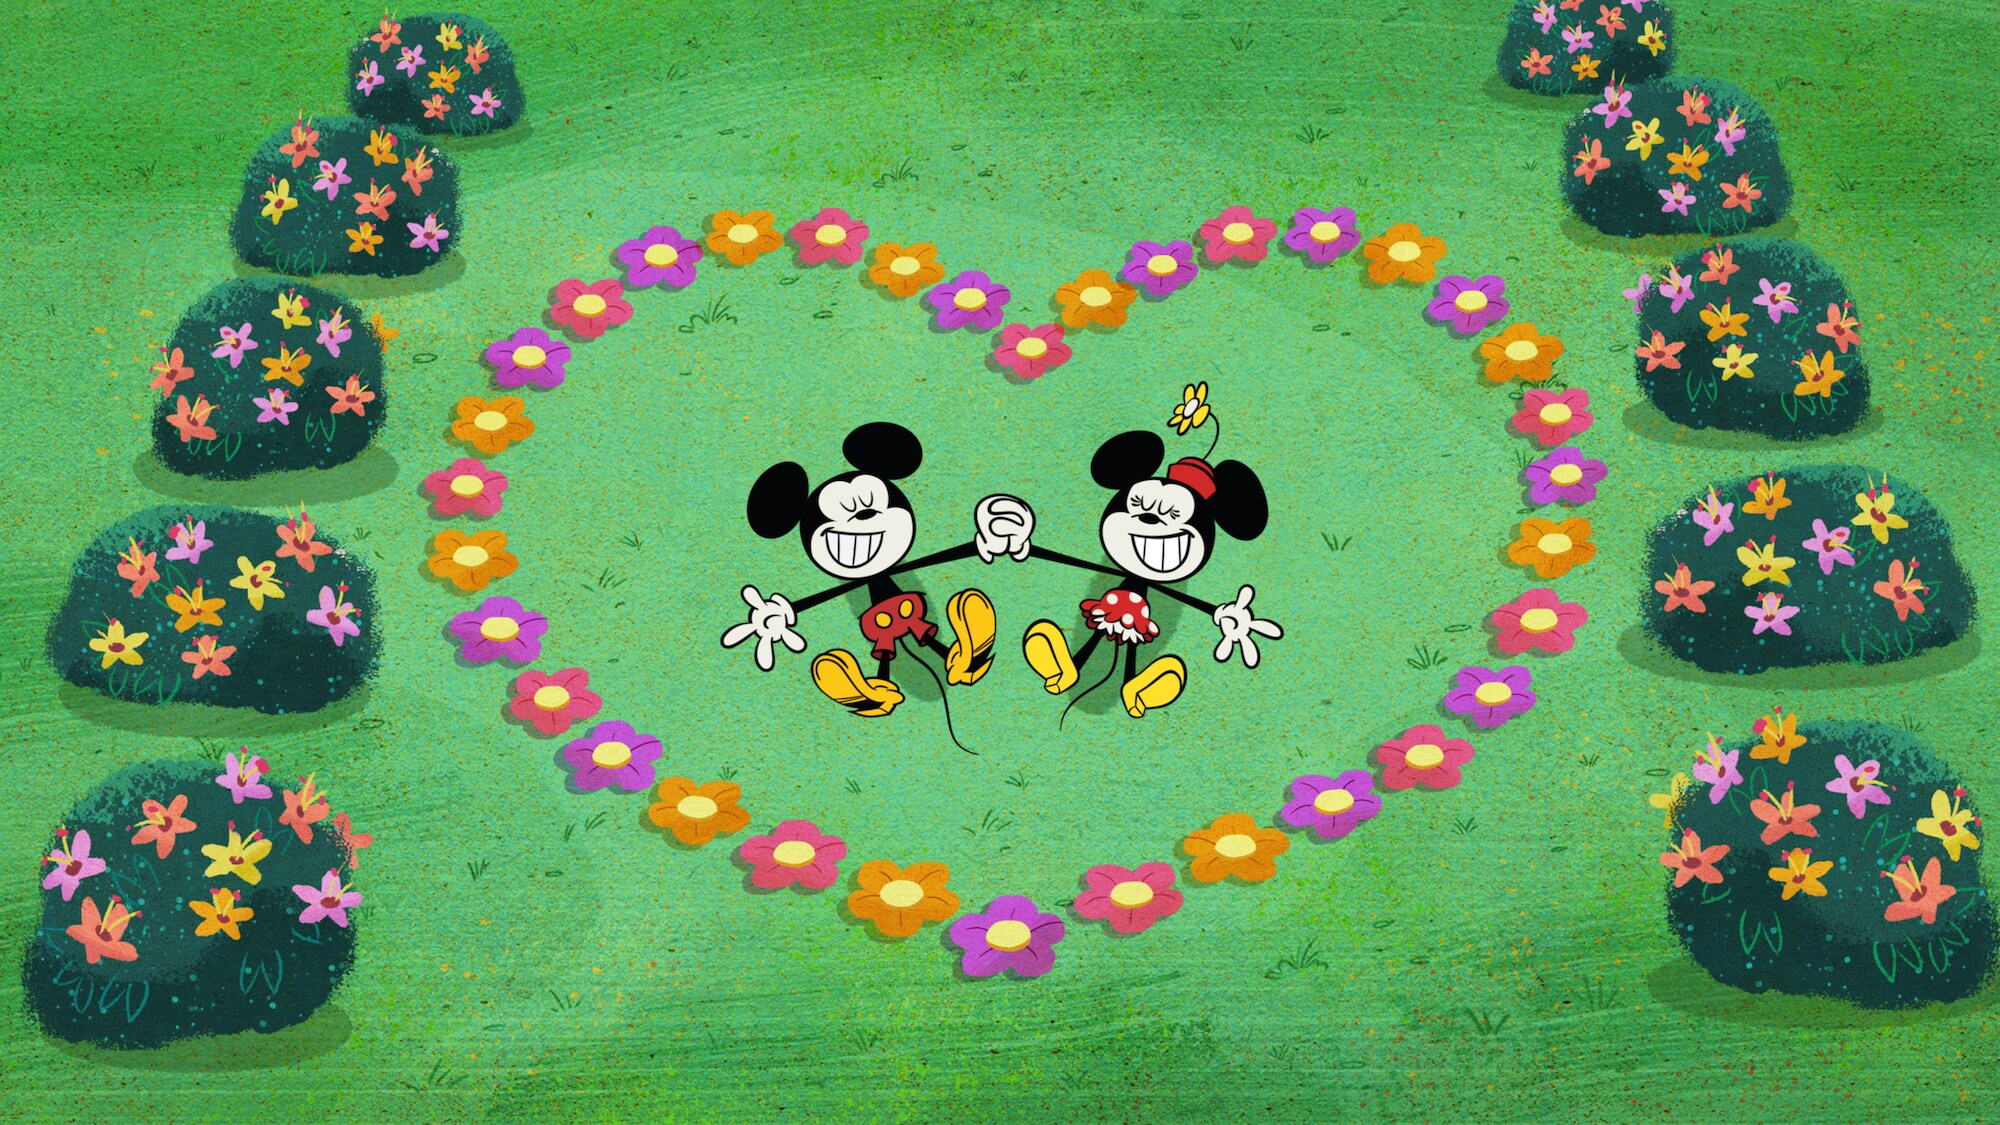 THE WONDERFUL WORLD OF MICKEY MOUSE - "The Wonderful Spring of Mickey Mouse" (Disney)  MICKEY MOUSE, MINNIE MOUSE